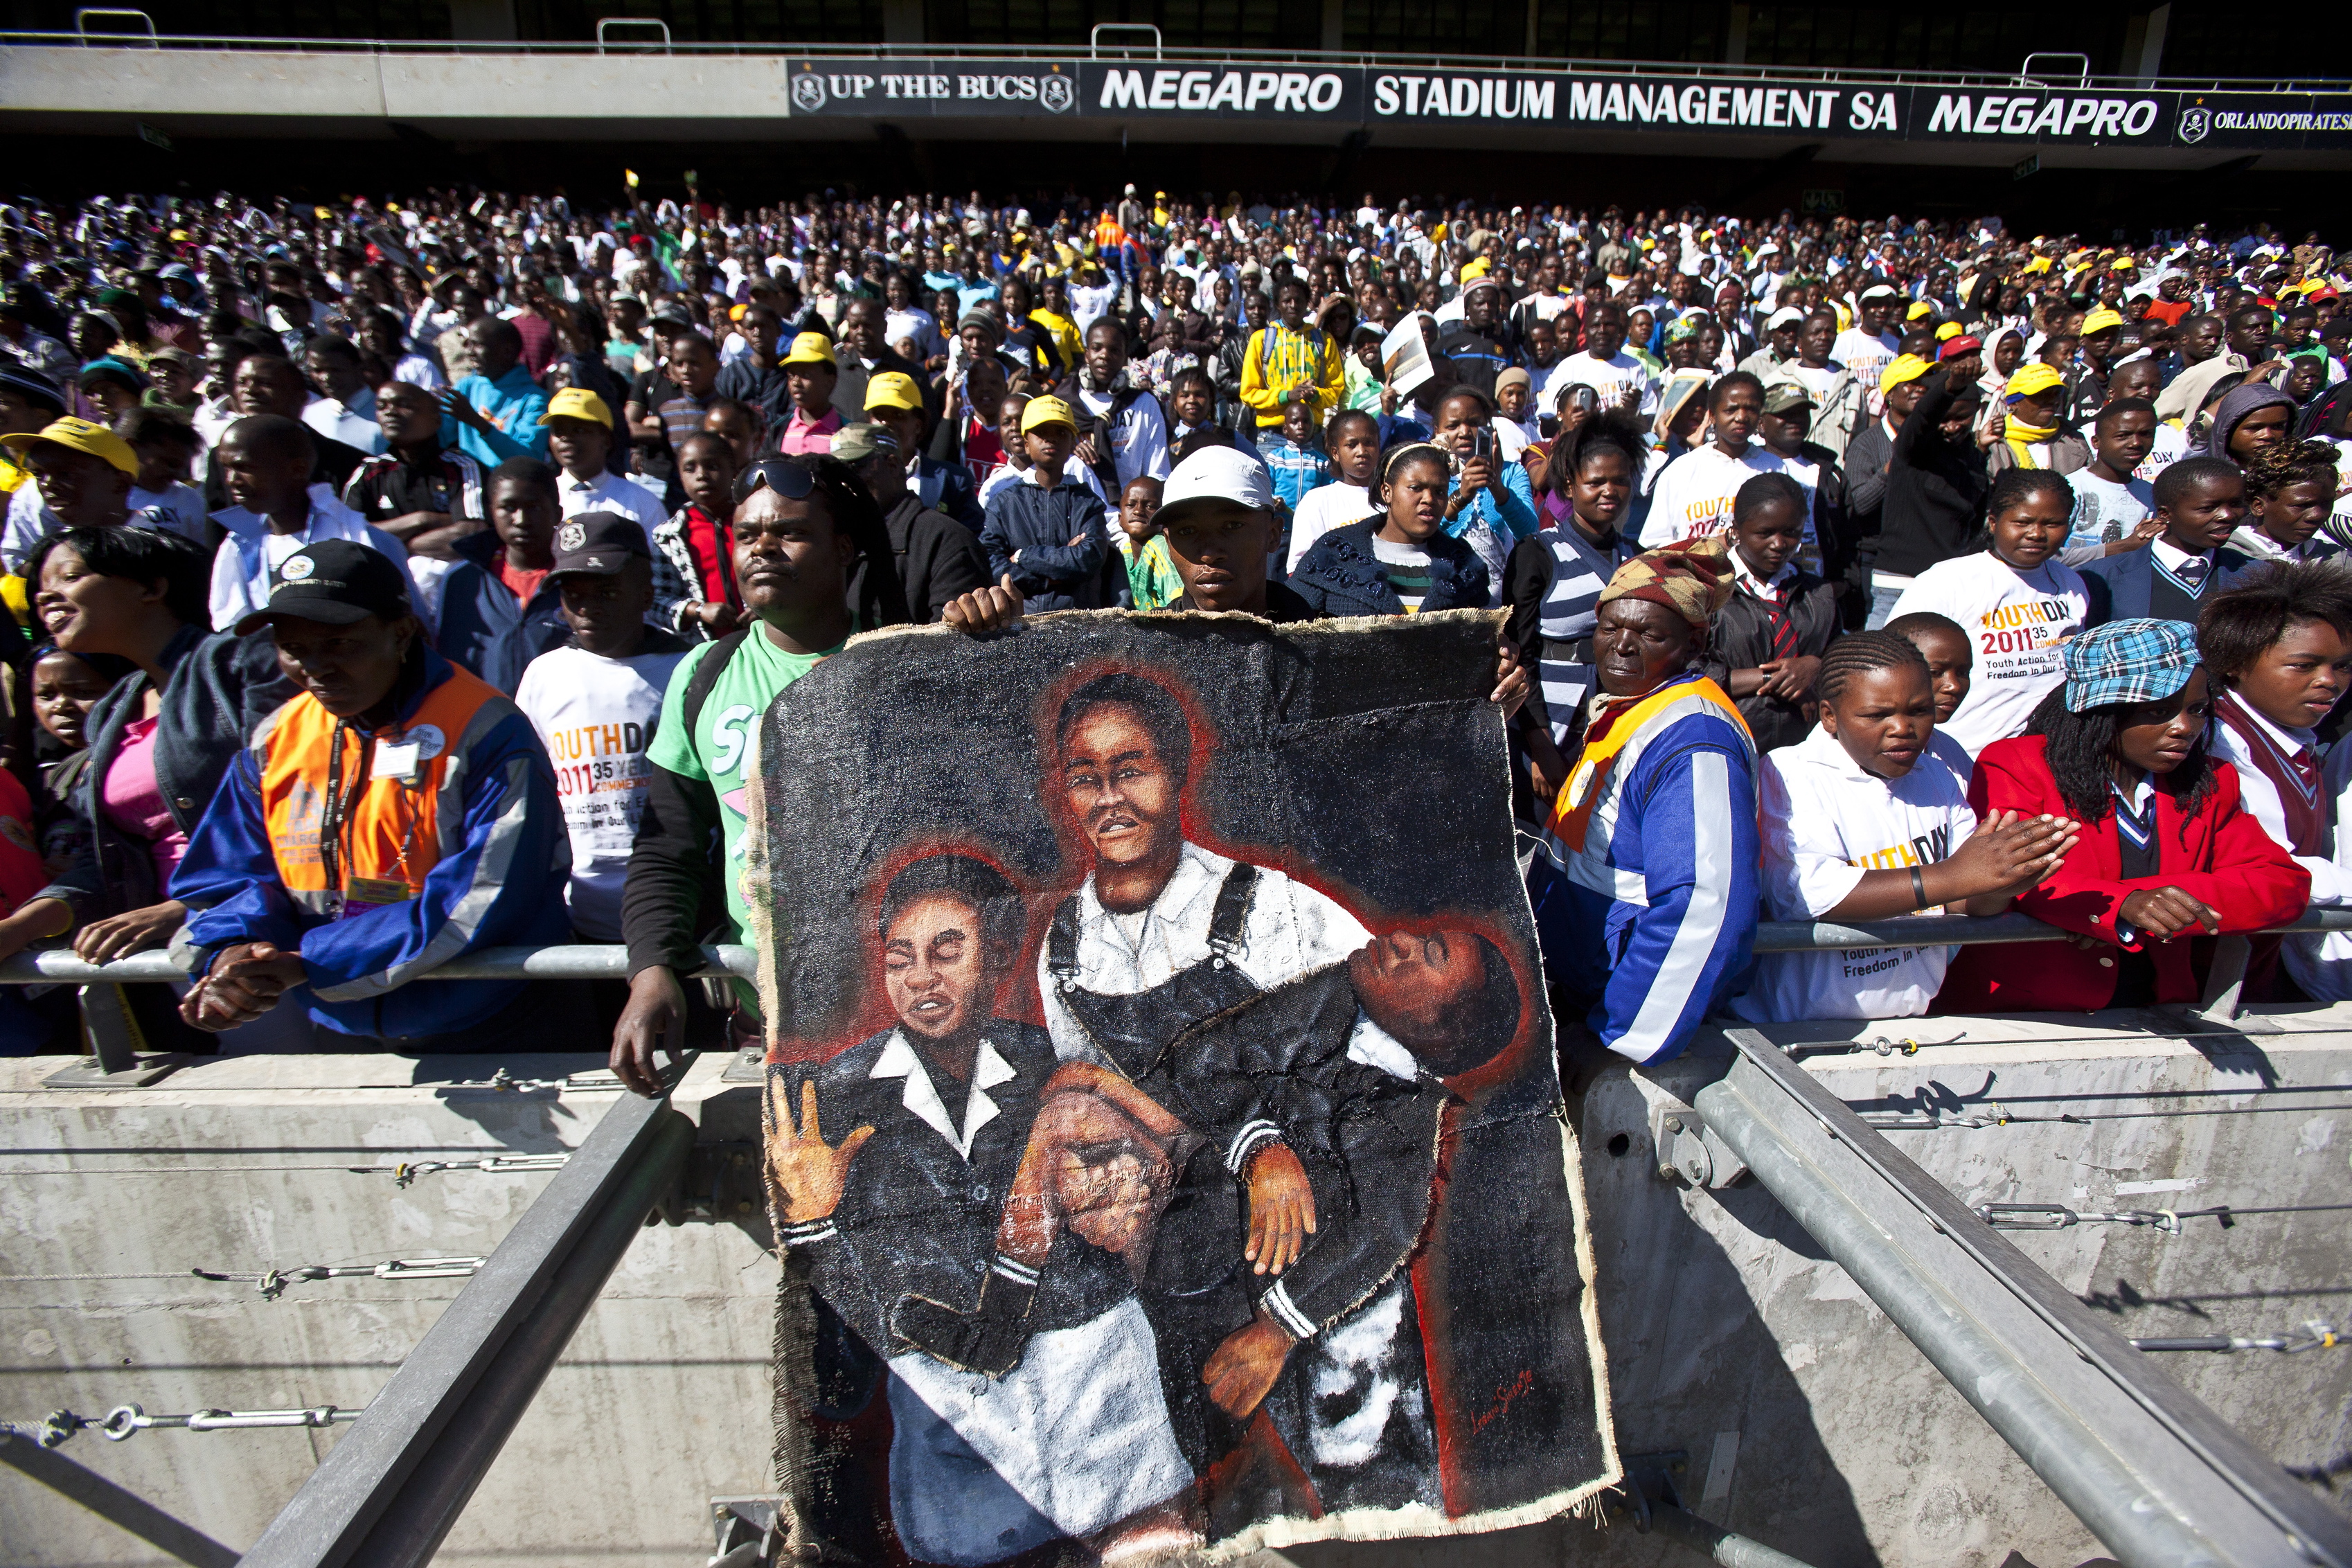 SOWETO, SOUTH AFRICA - JUNE 16: Crowds gathered at the Orlando Stadium for the Youth Day celebrations on June 16, 2011 in Soweto, Johannesburg, South Africa..  (Photo by Gallo Images/The Times/Halden Krog)